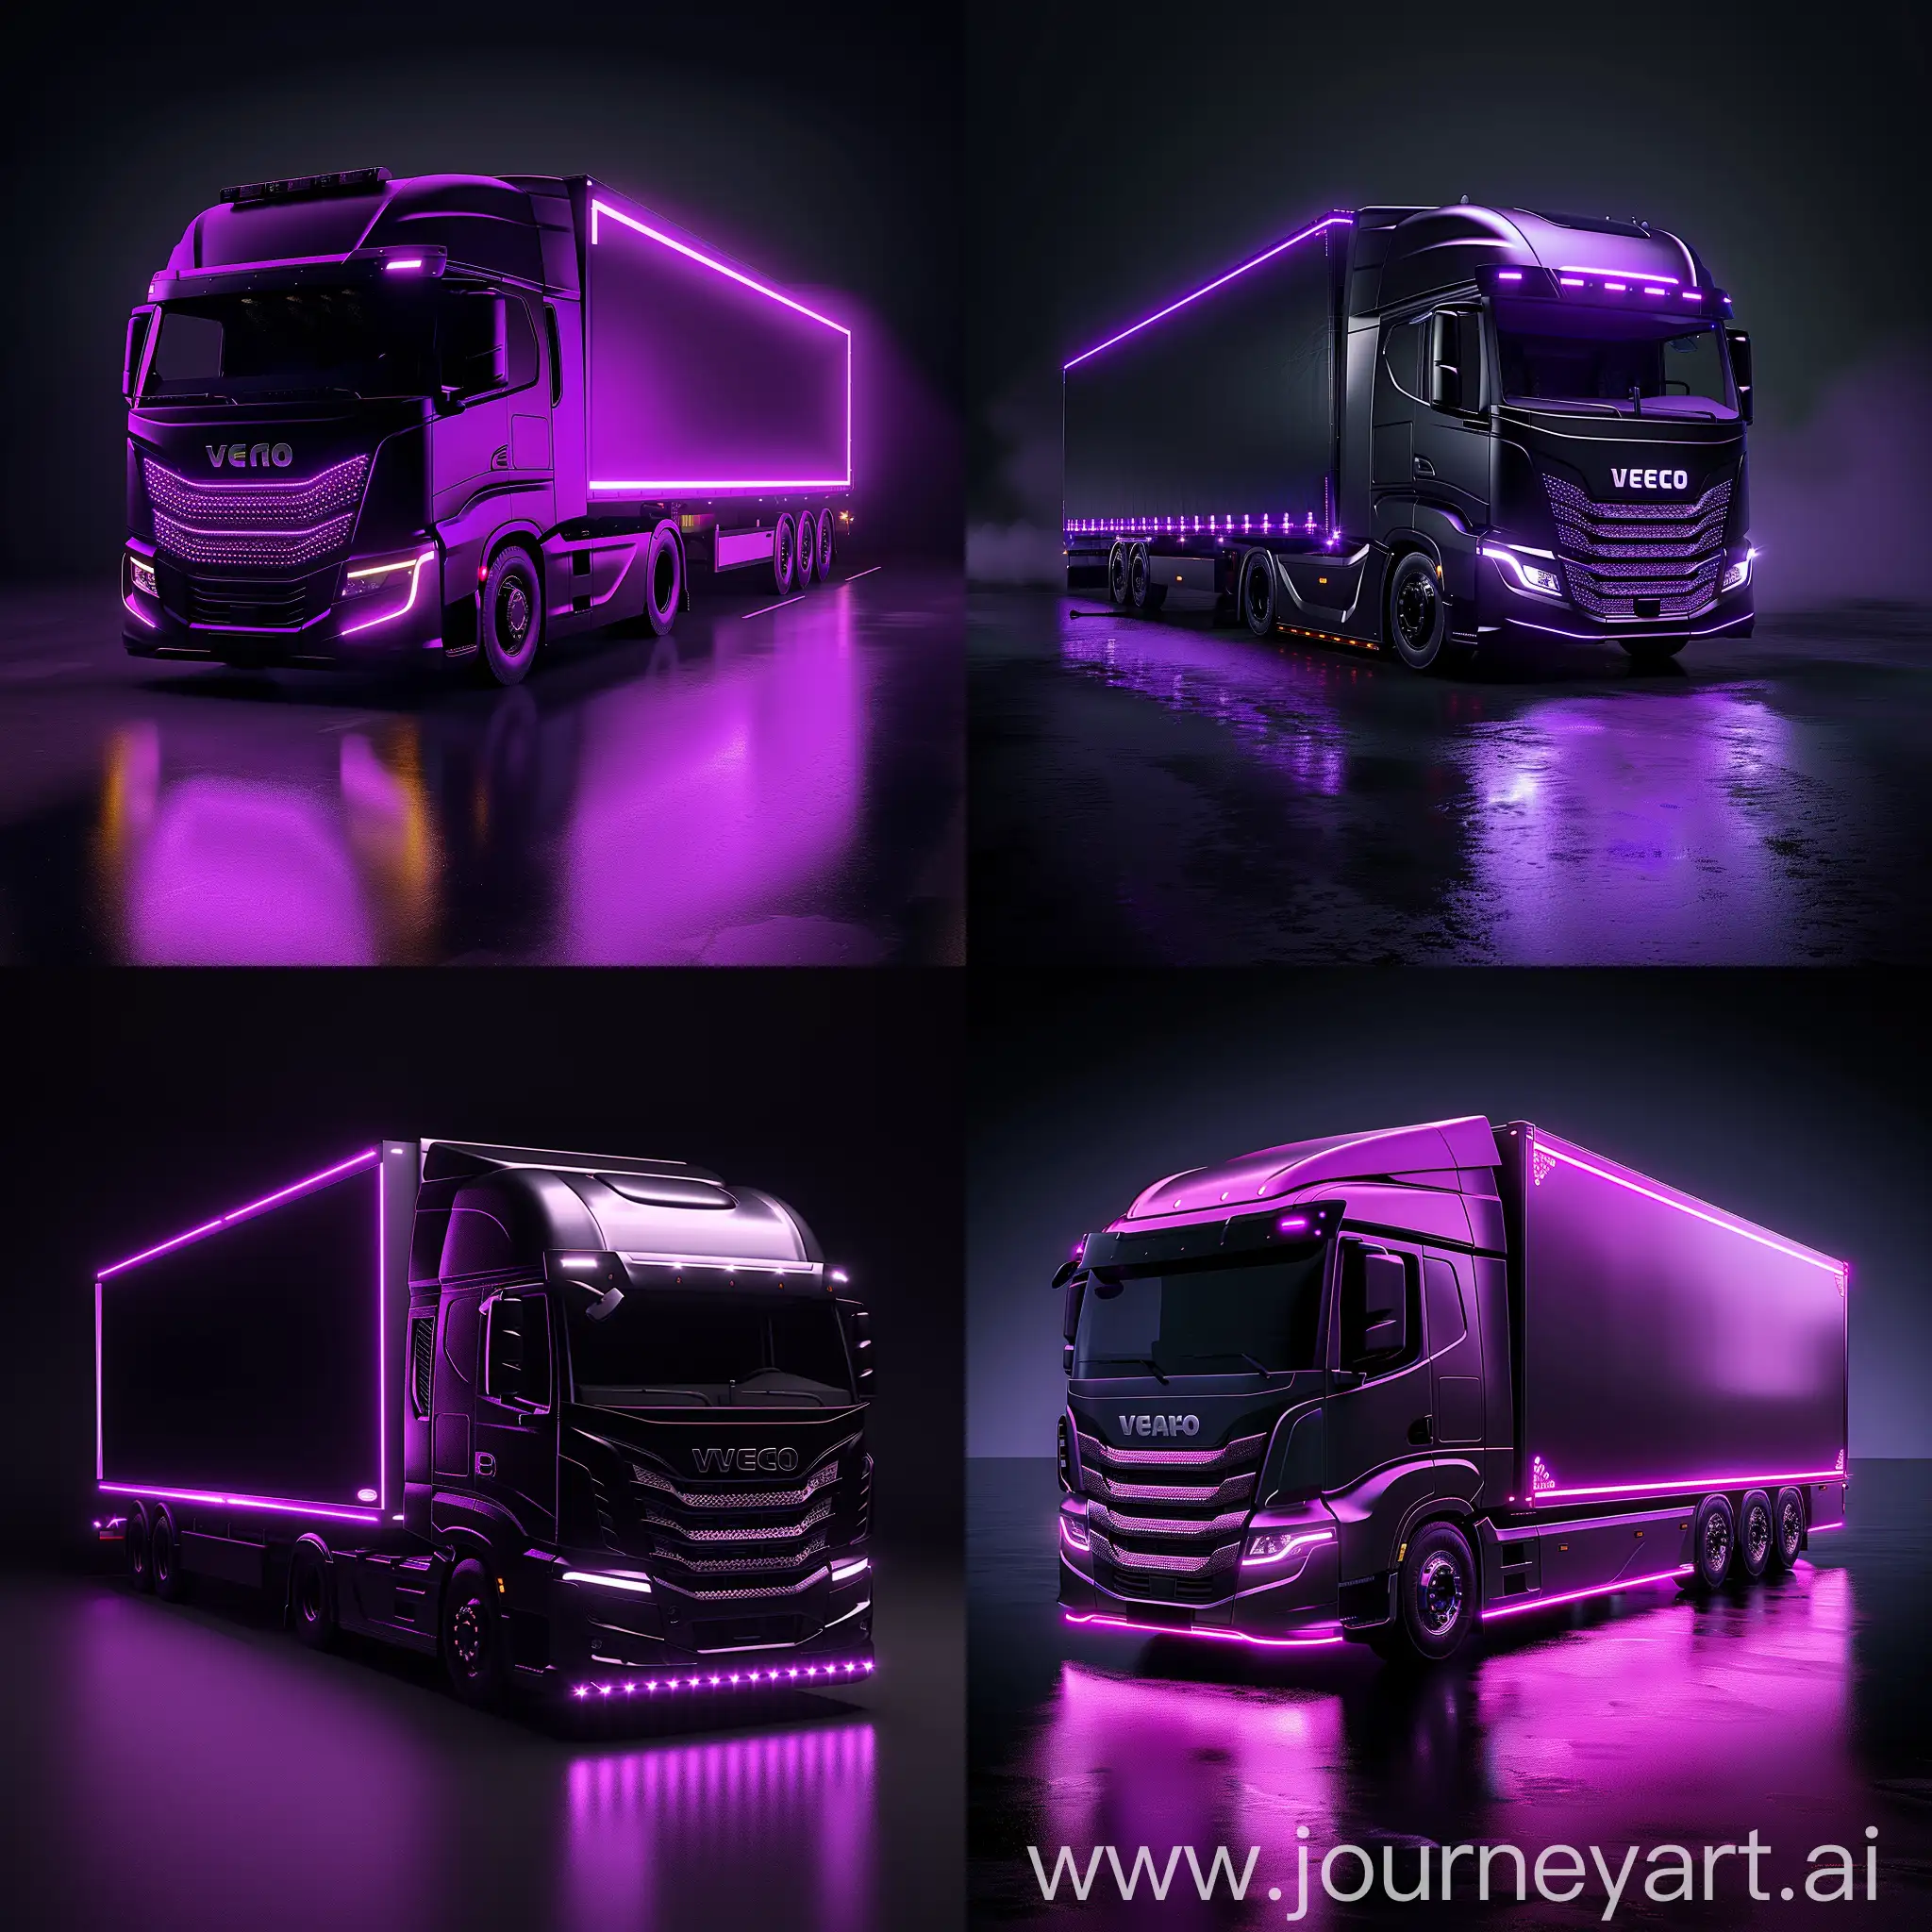 Realistic-Iveco-Eurocargo-Truck-with-Perfect-Lighting-on-Dark-Background